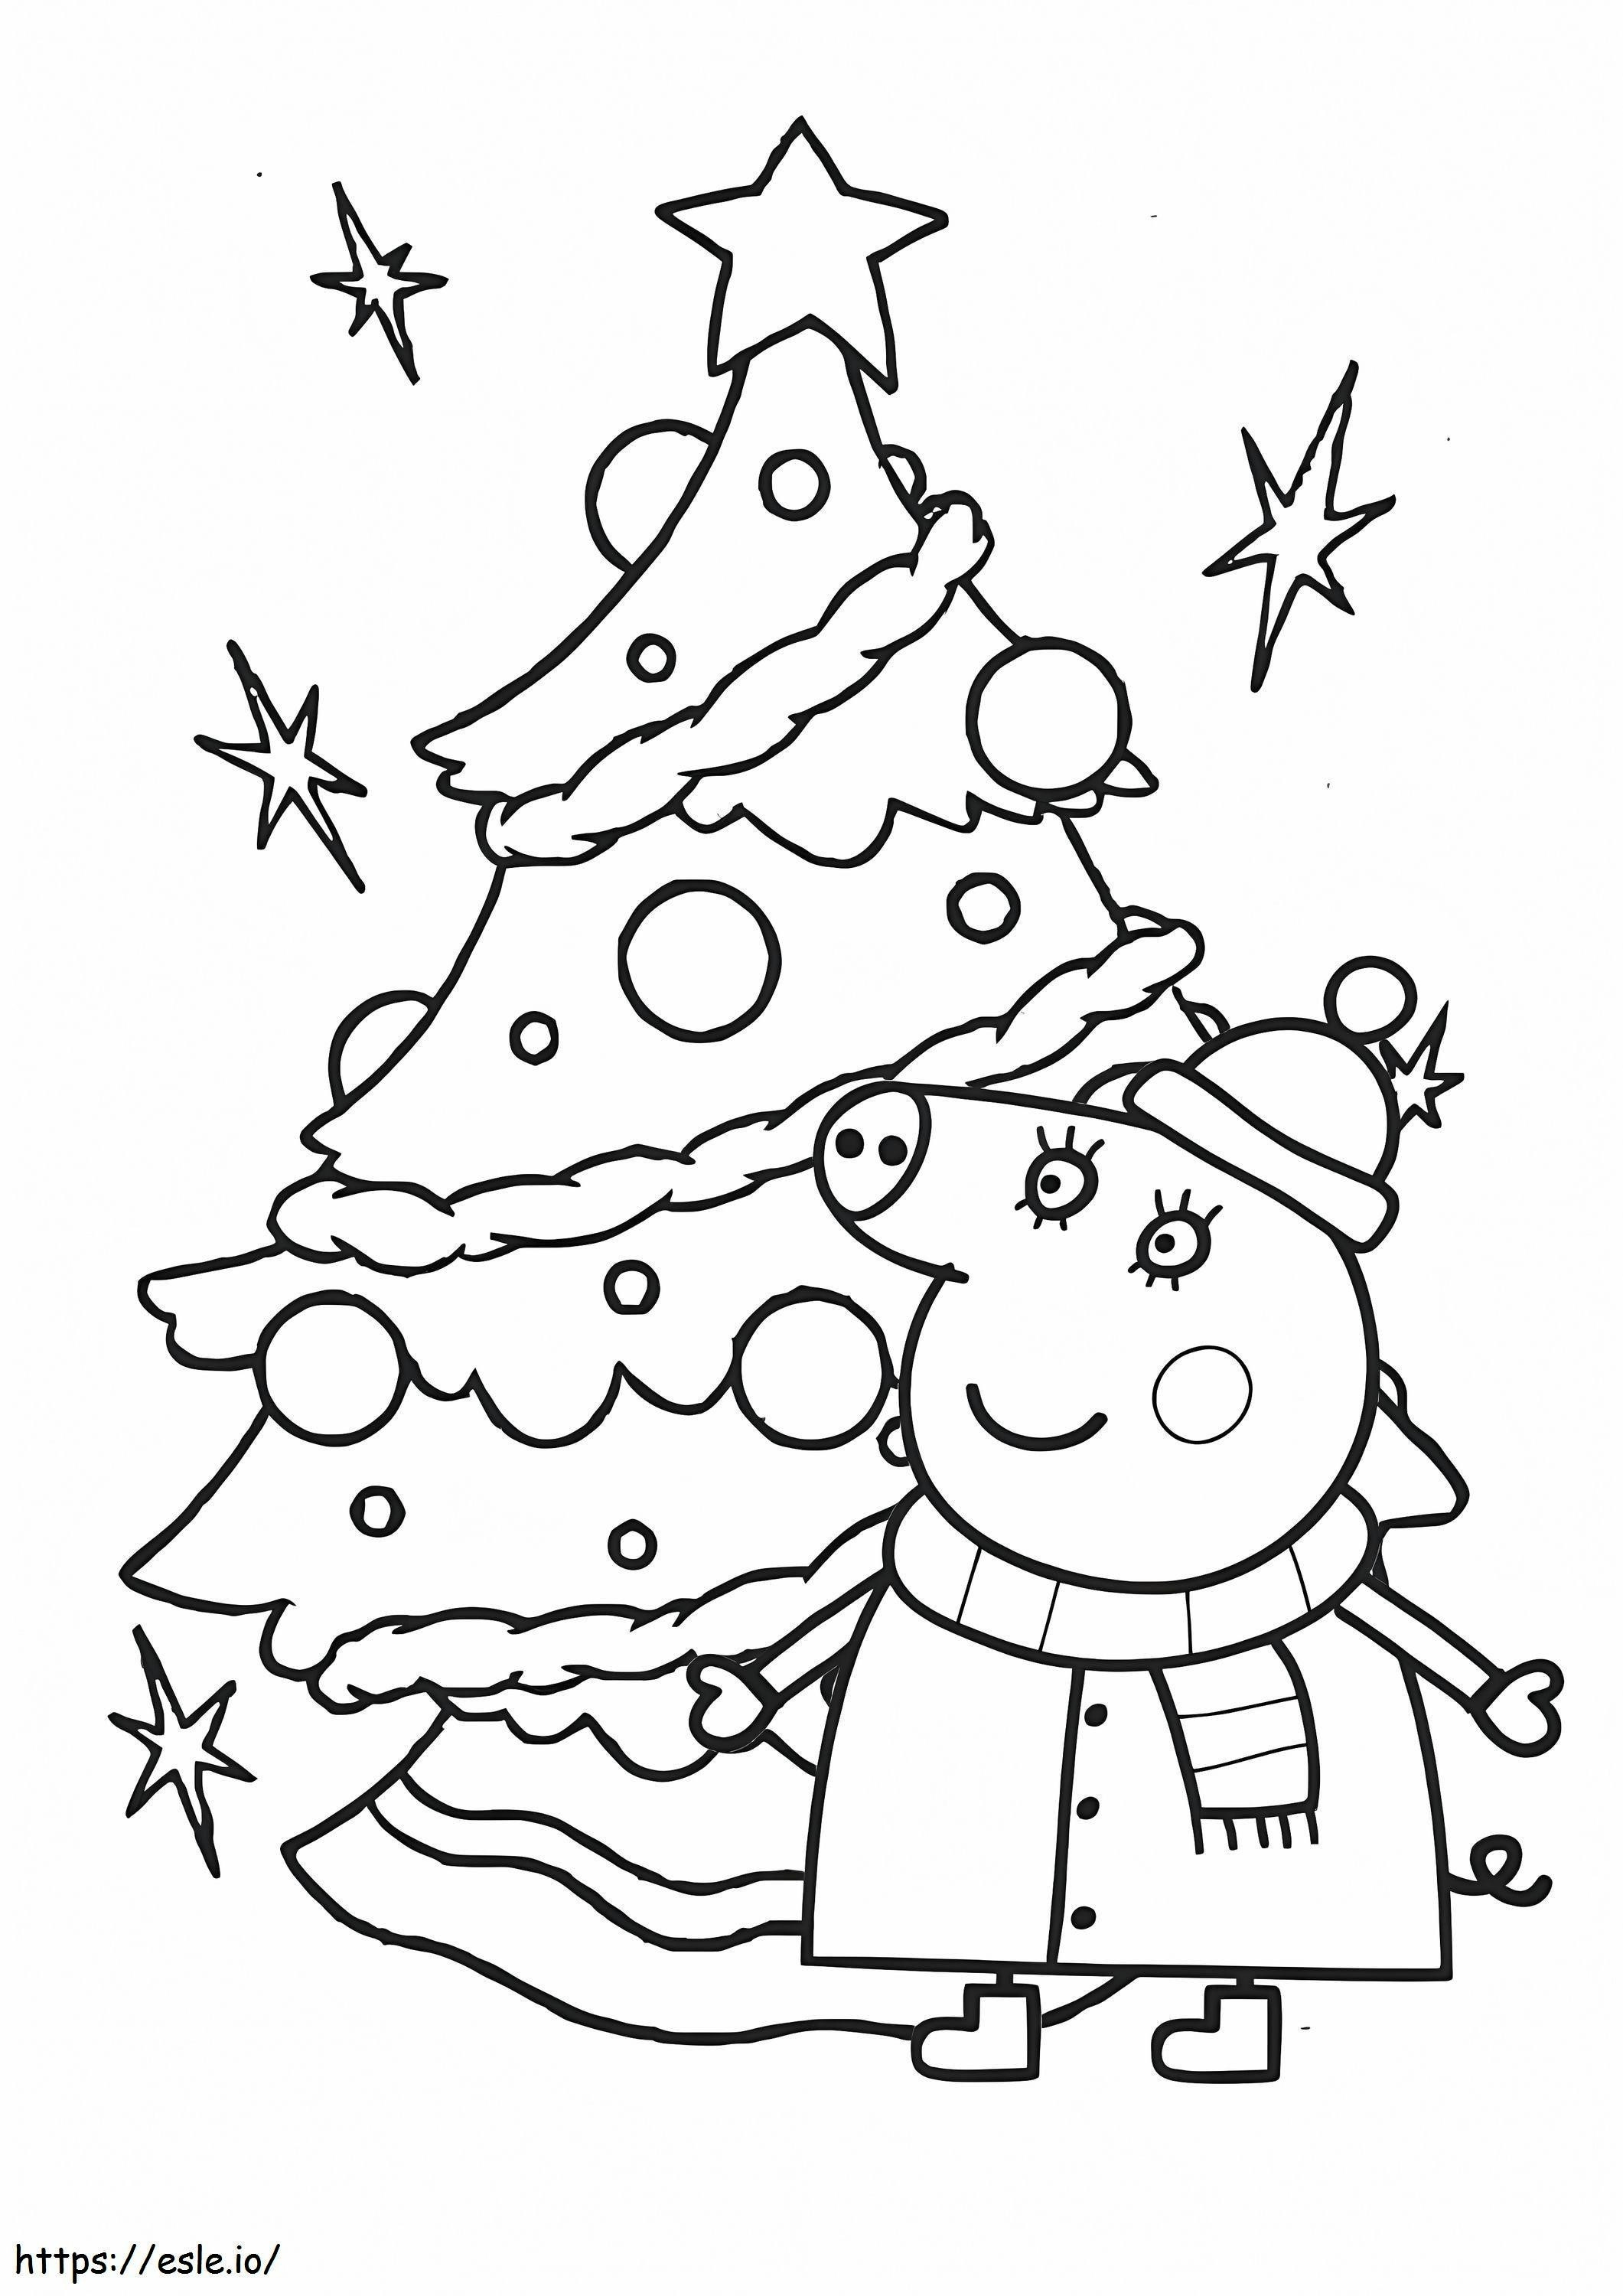 Peppa Pig With Christmas Tree coloring page